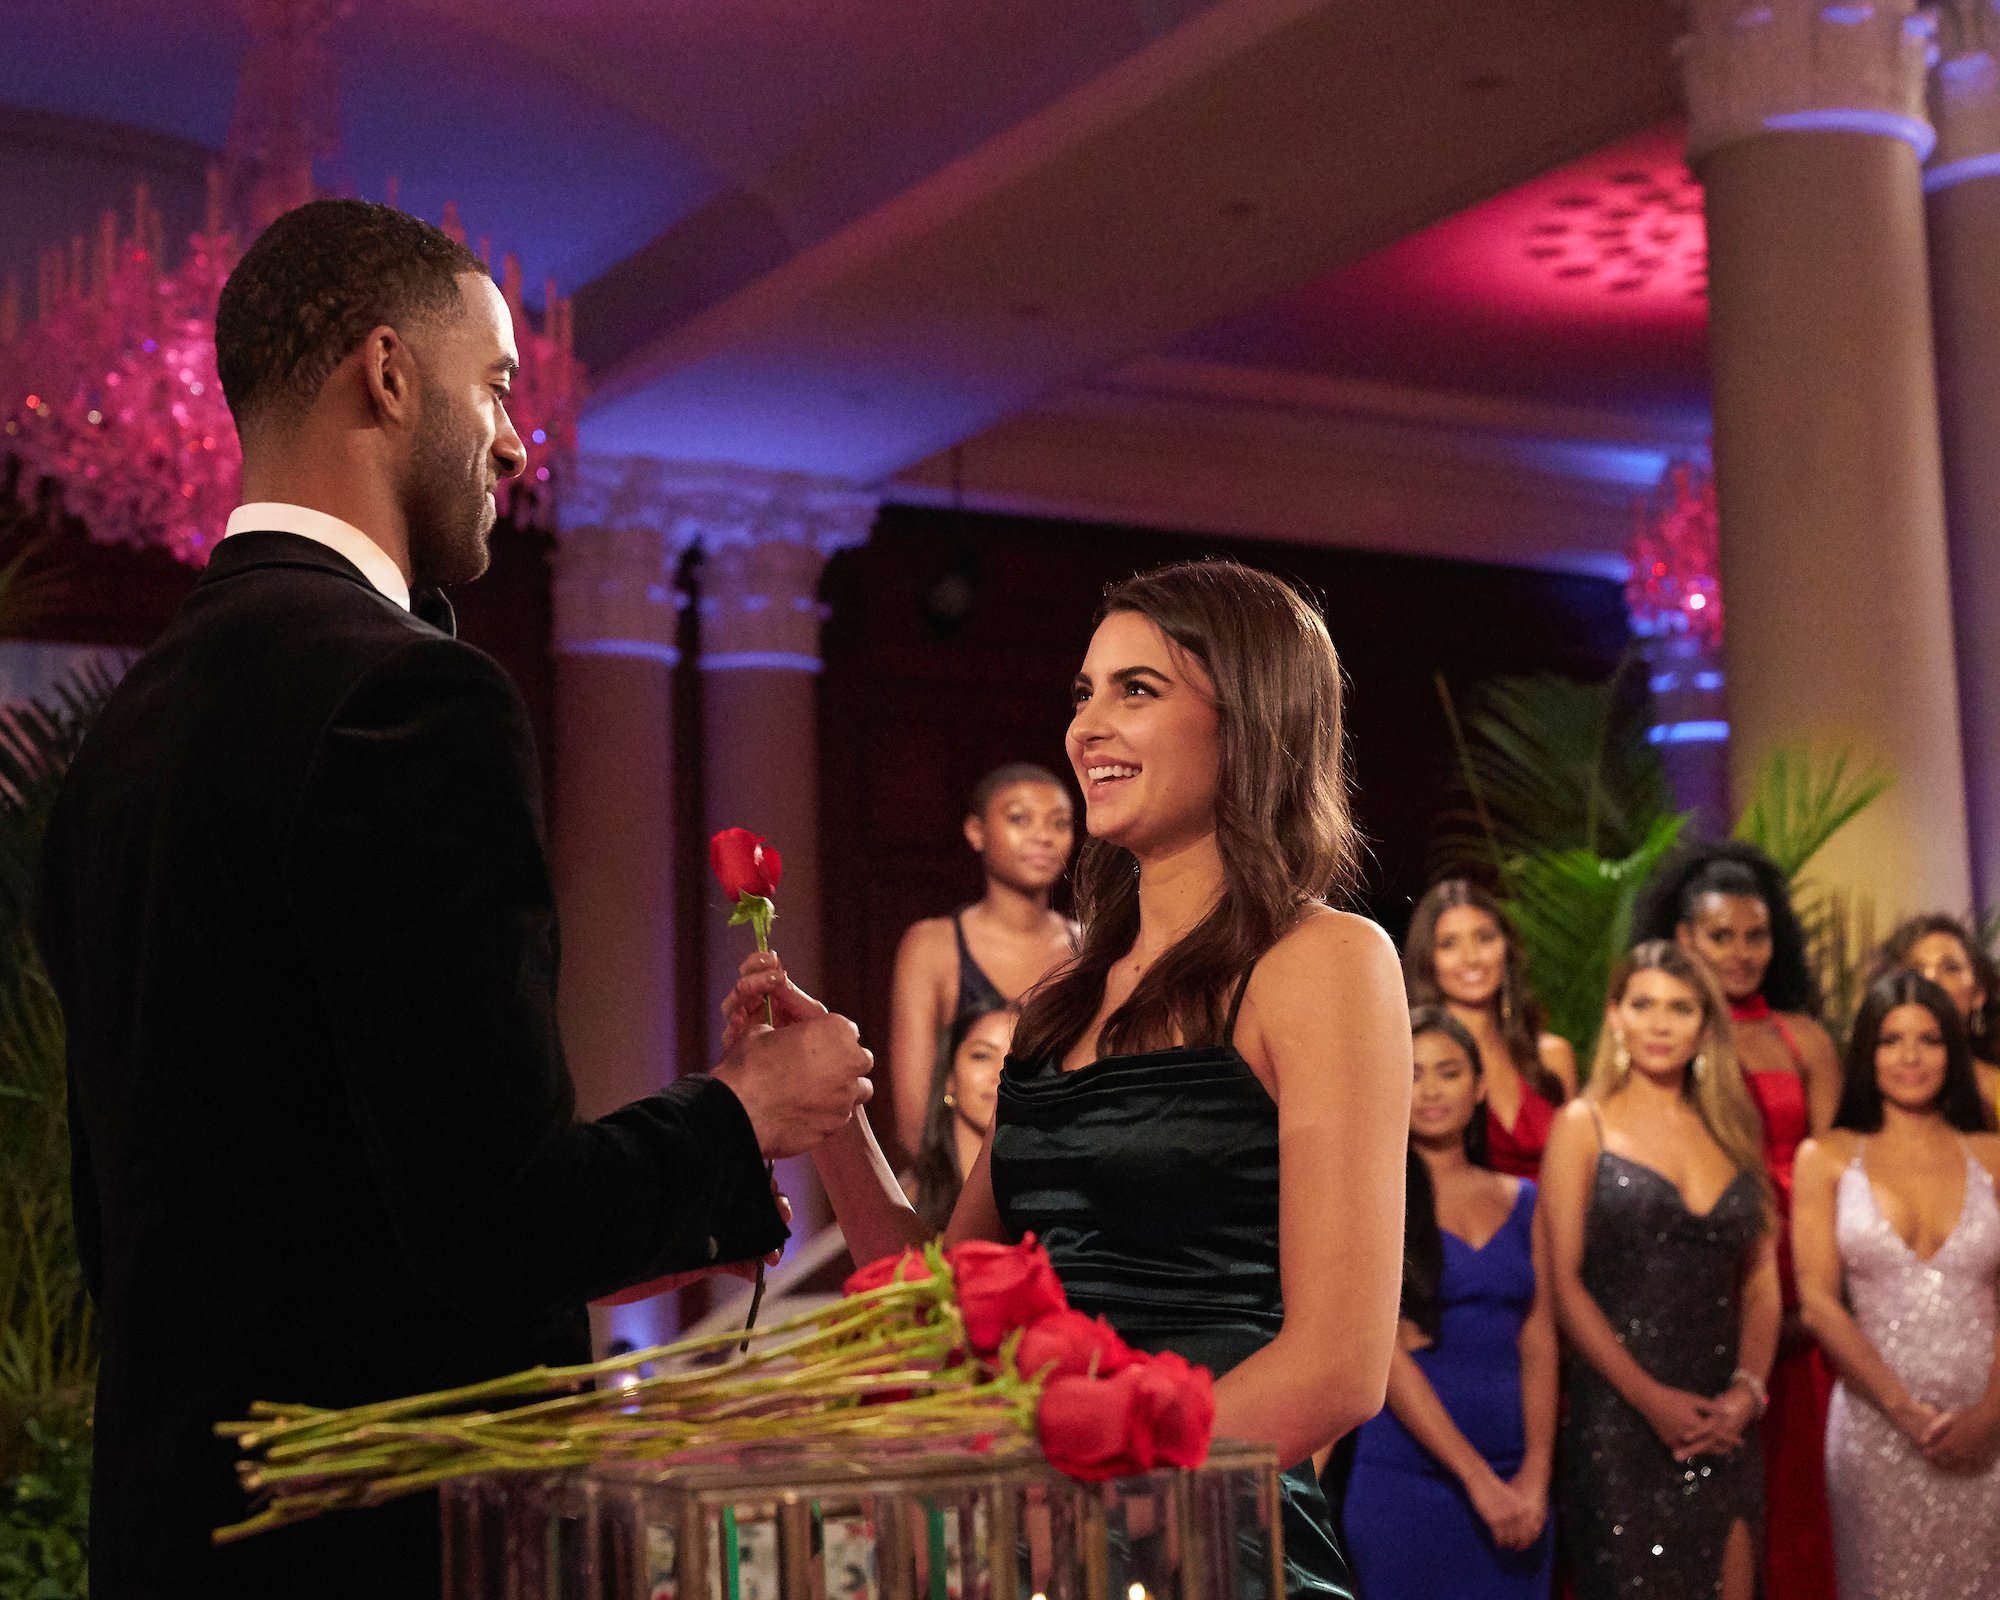 Matt James and Rachael Kirkconnell on 'THE BACHELOR' during a rose ceremony